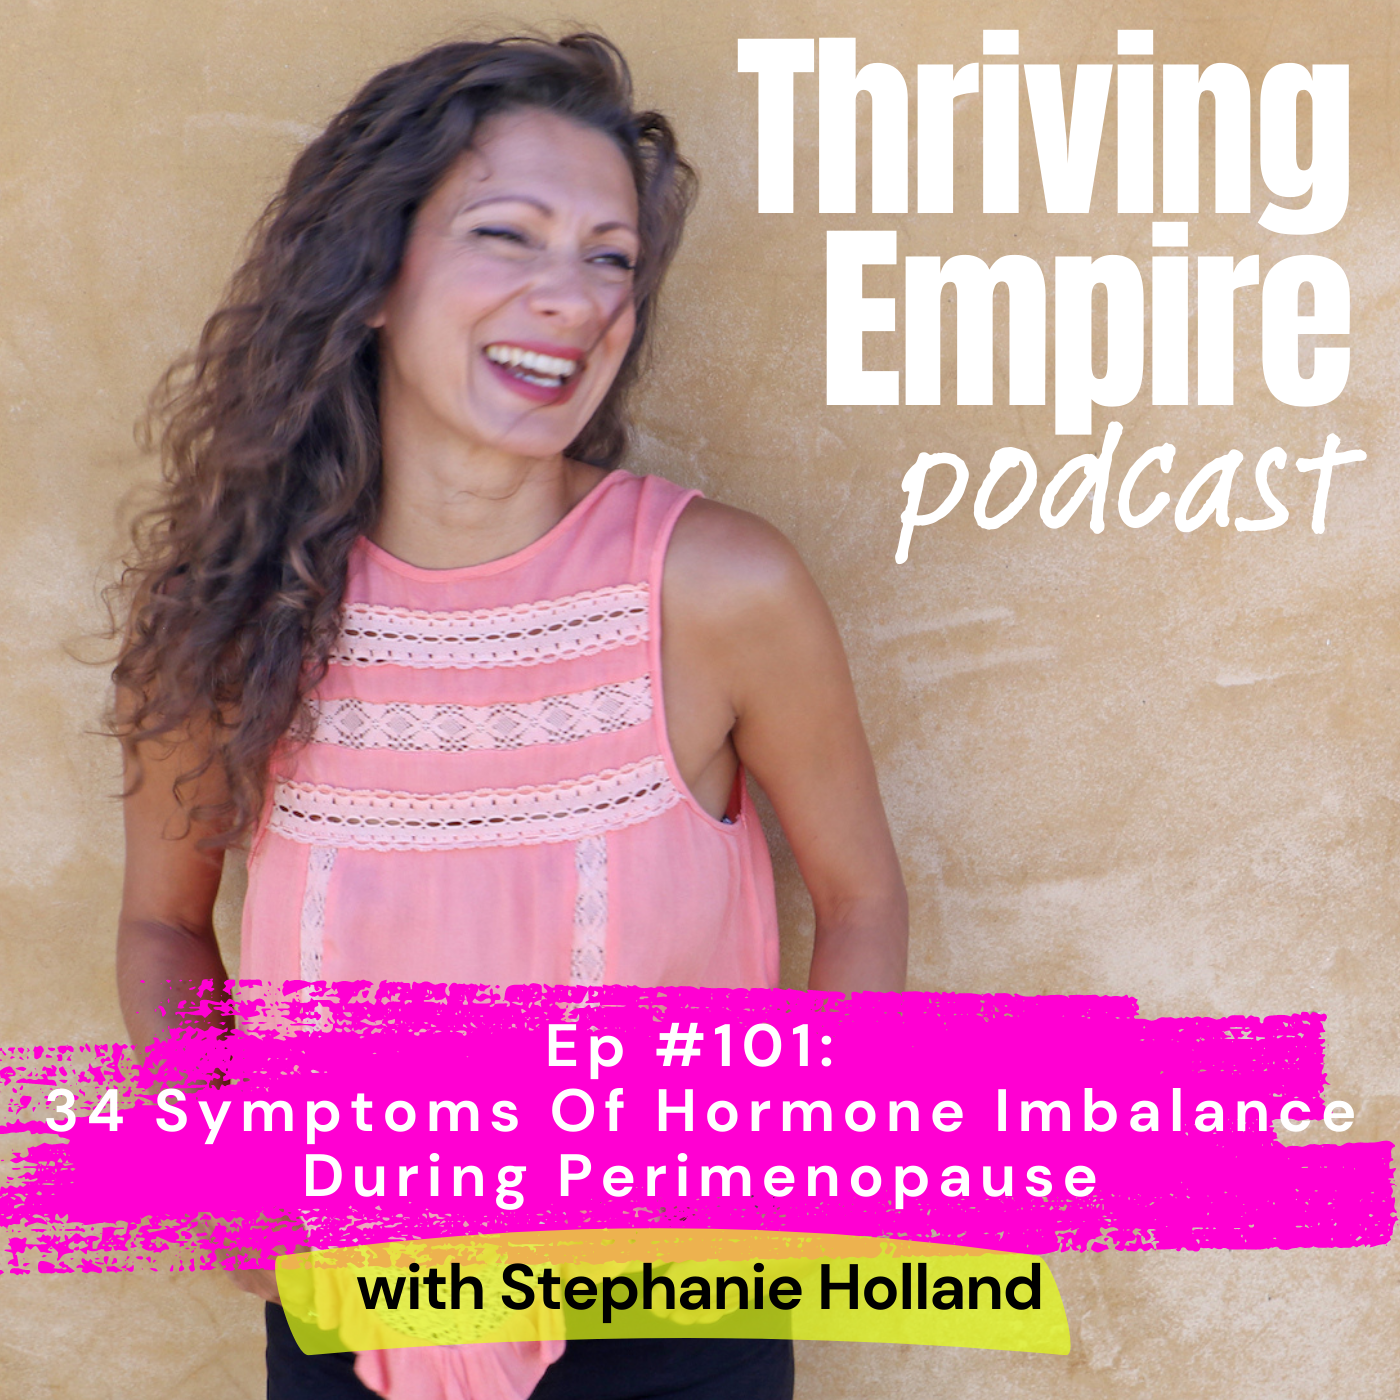 Ep #101: 34 Symptoms Of Hormone Imbalance During Perimenopause